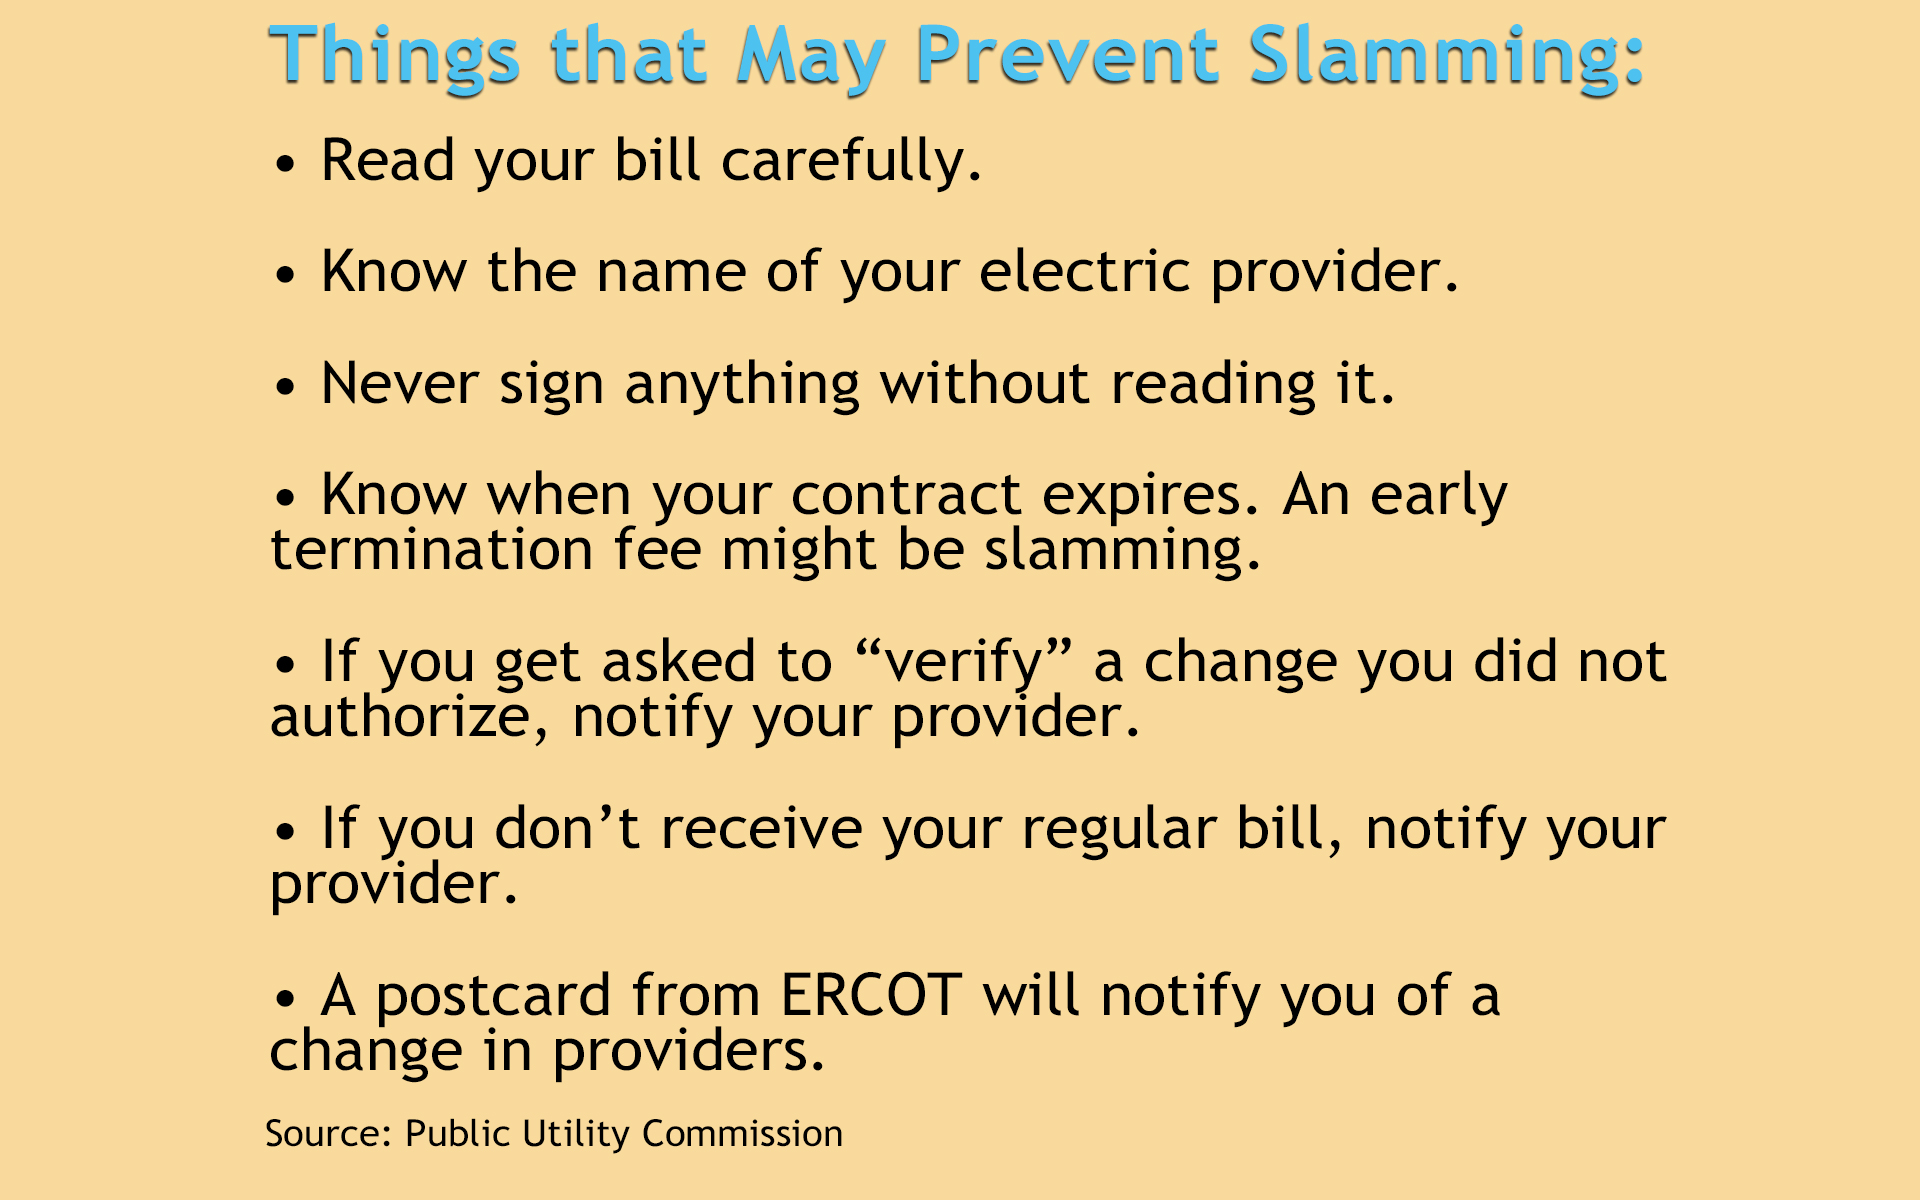 Prevent slamming: • Read your bill carefully. • Know the name of your electric provider. • Never sign anything without reading it. • Know when your contract expires. An early termination fee might be slamming. • If you get asked to “verify” a change you did not authorize, notify your provider. • If you don’t receive your regular bill, notify your provider. • A postcard from ERCOT will notify you of a change in providers.